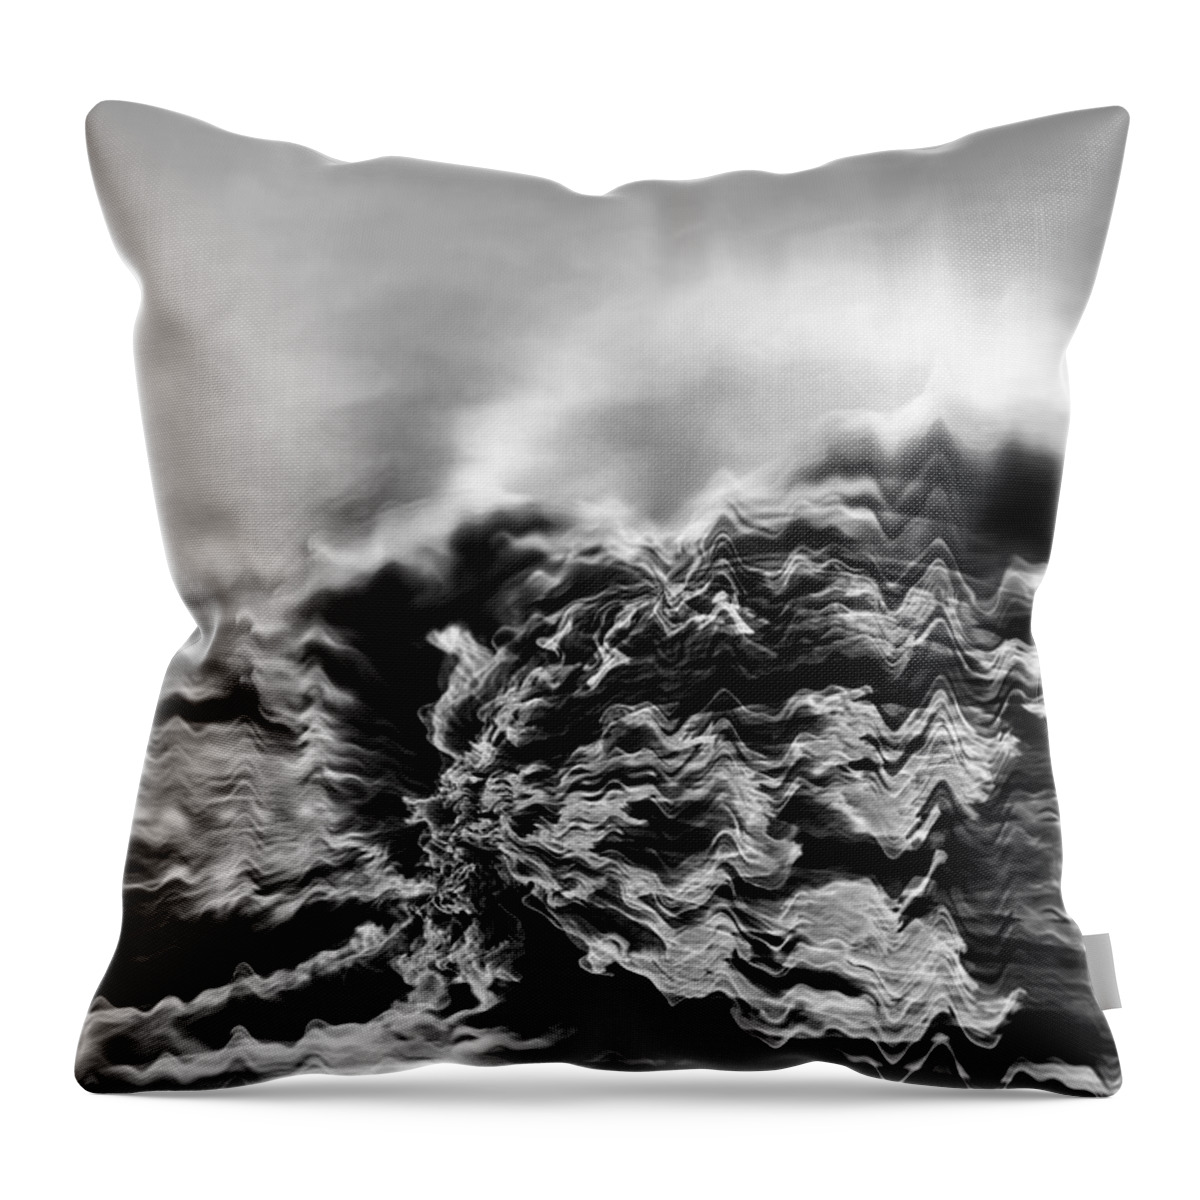 Earthly Vibrations Throw Pillow featuring the digital art Earthly Vibrations by Dolores Kaufman